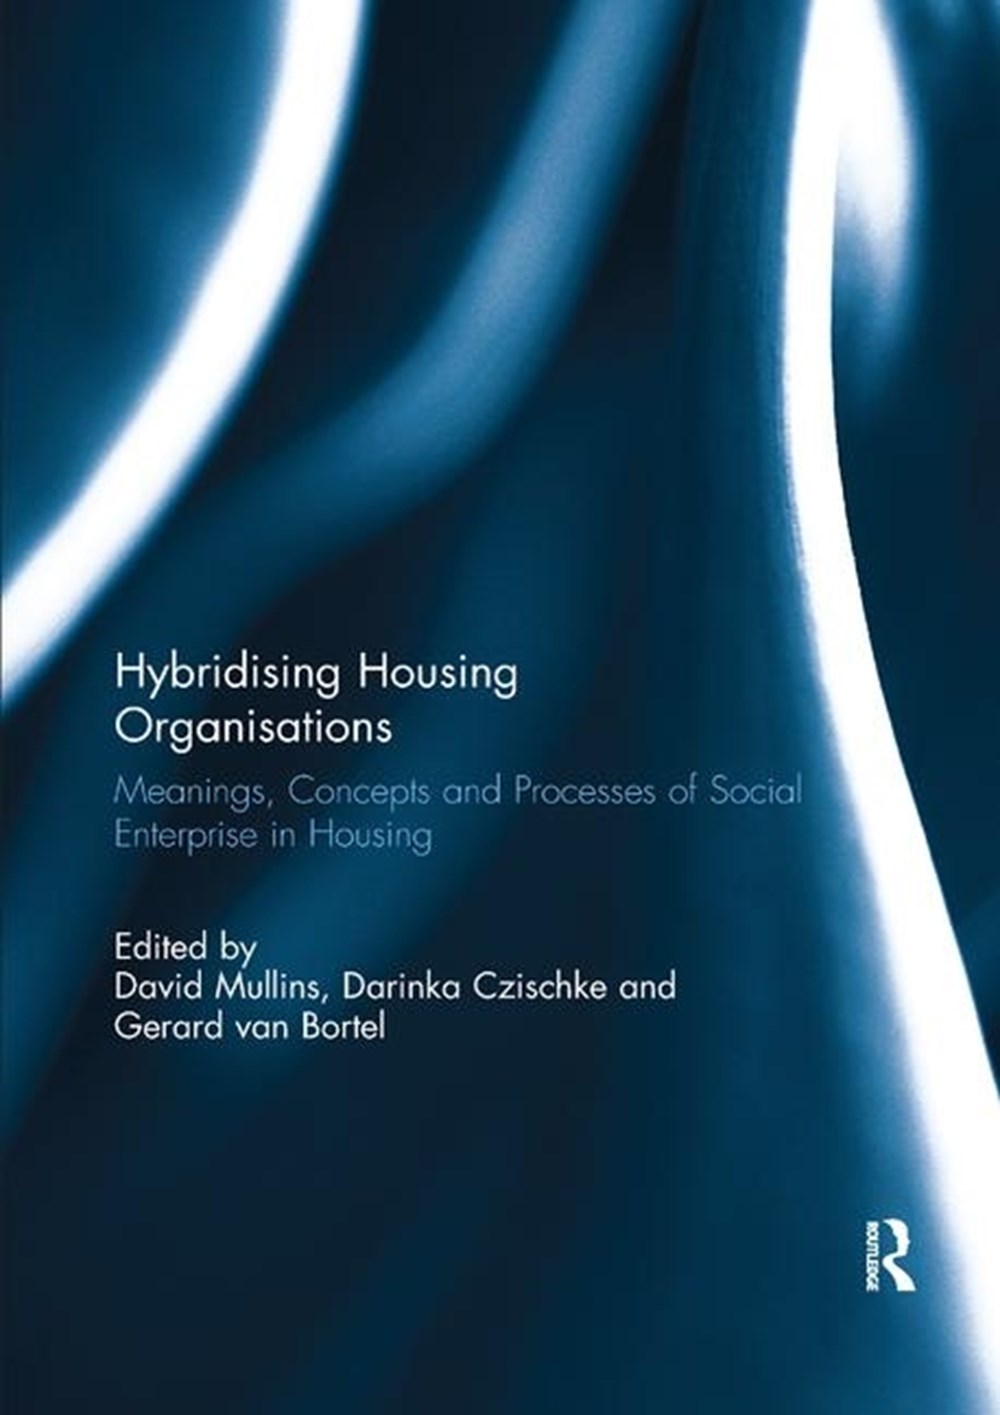 Hybridising Housing Organisations Meanings, Concepts and Processes of Social Enterprise in Housing